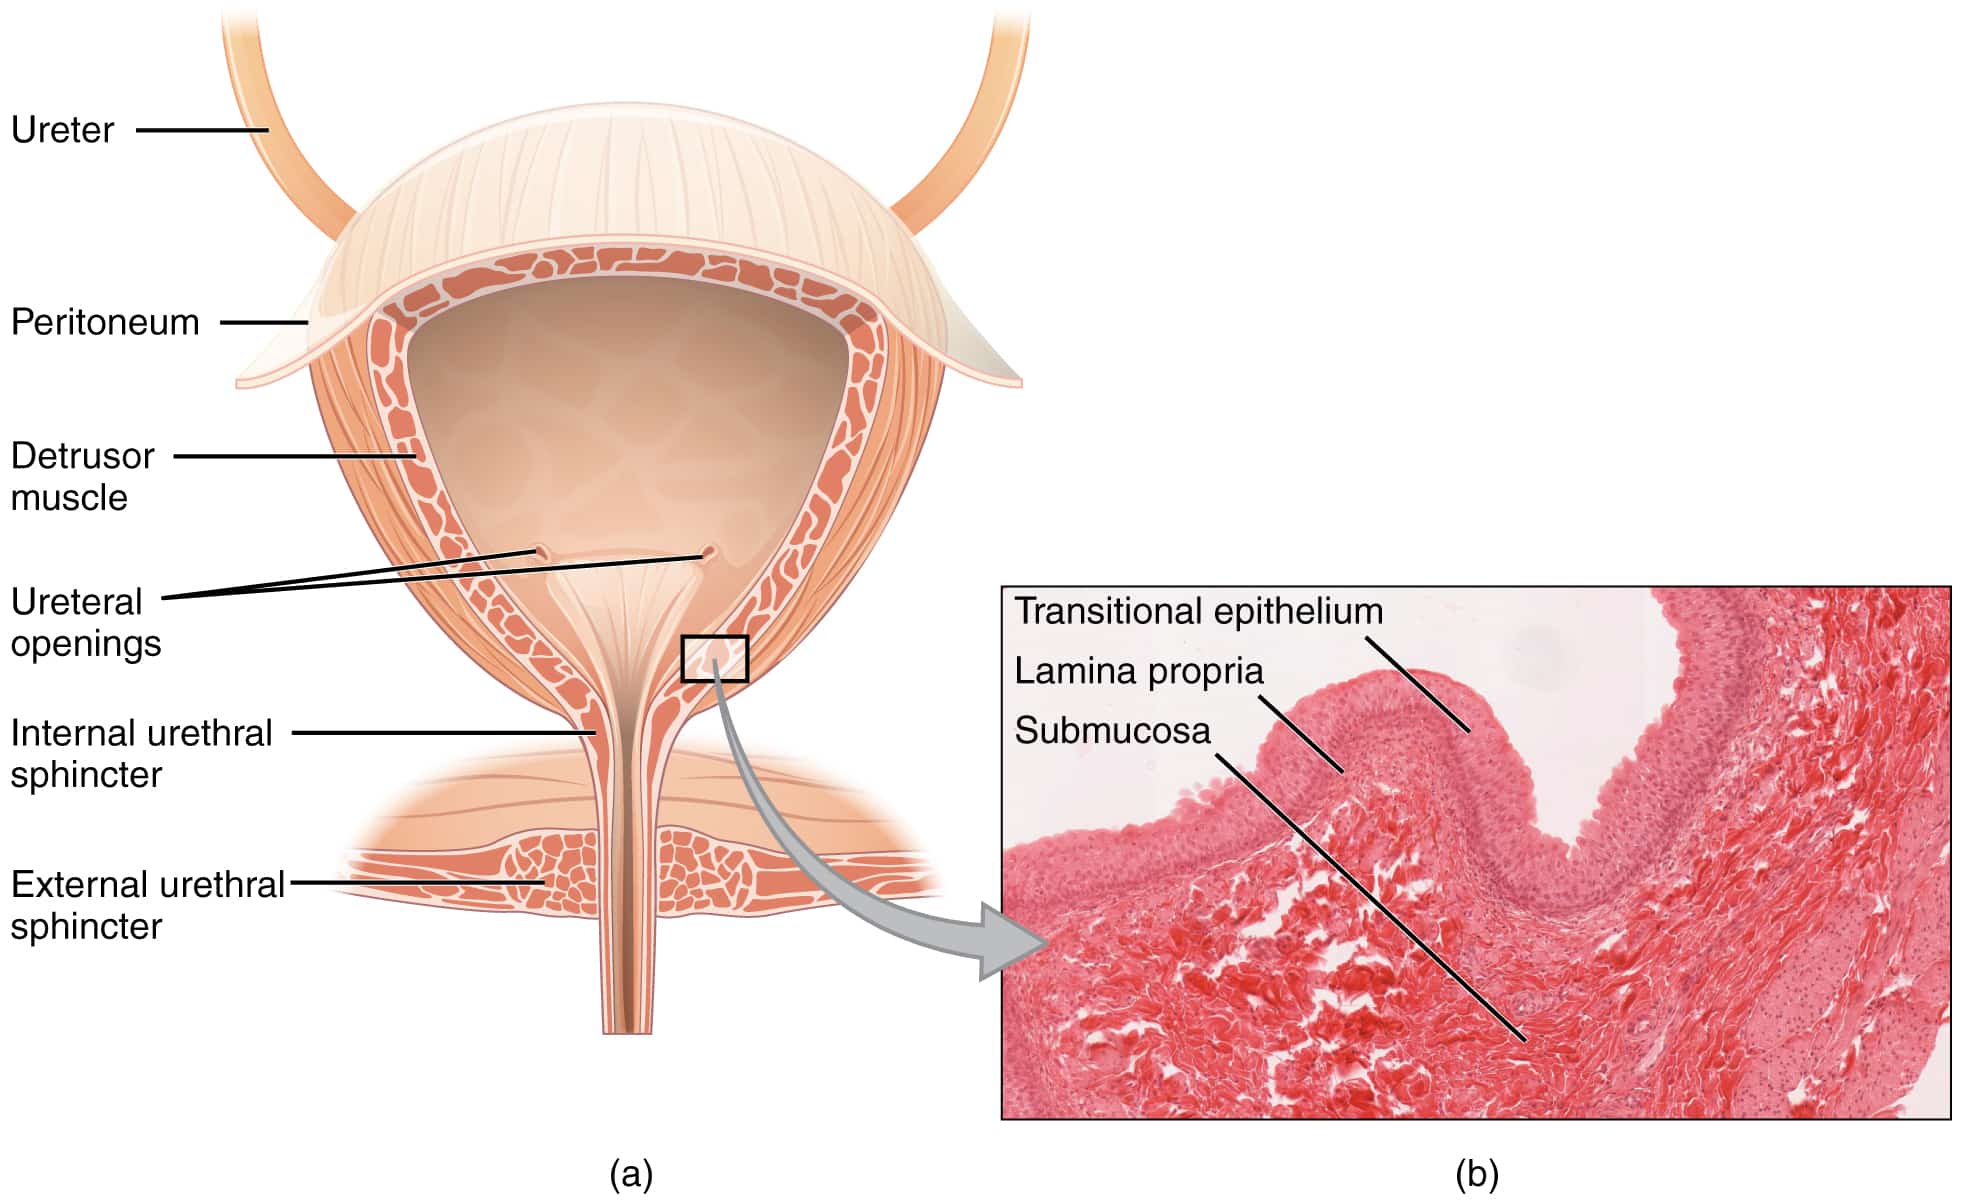 Change in urethral sphincter neuromuscular function during